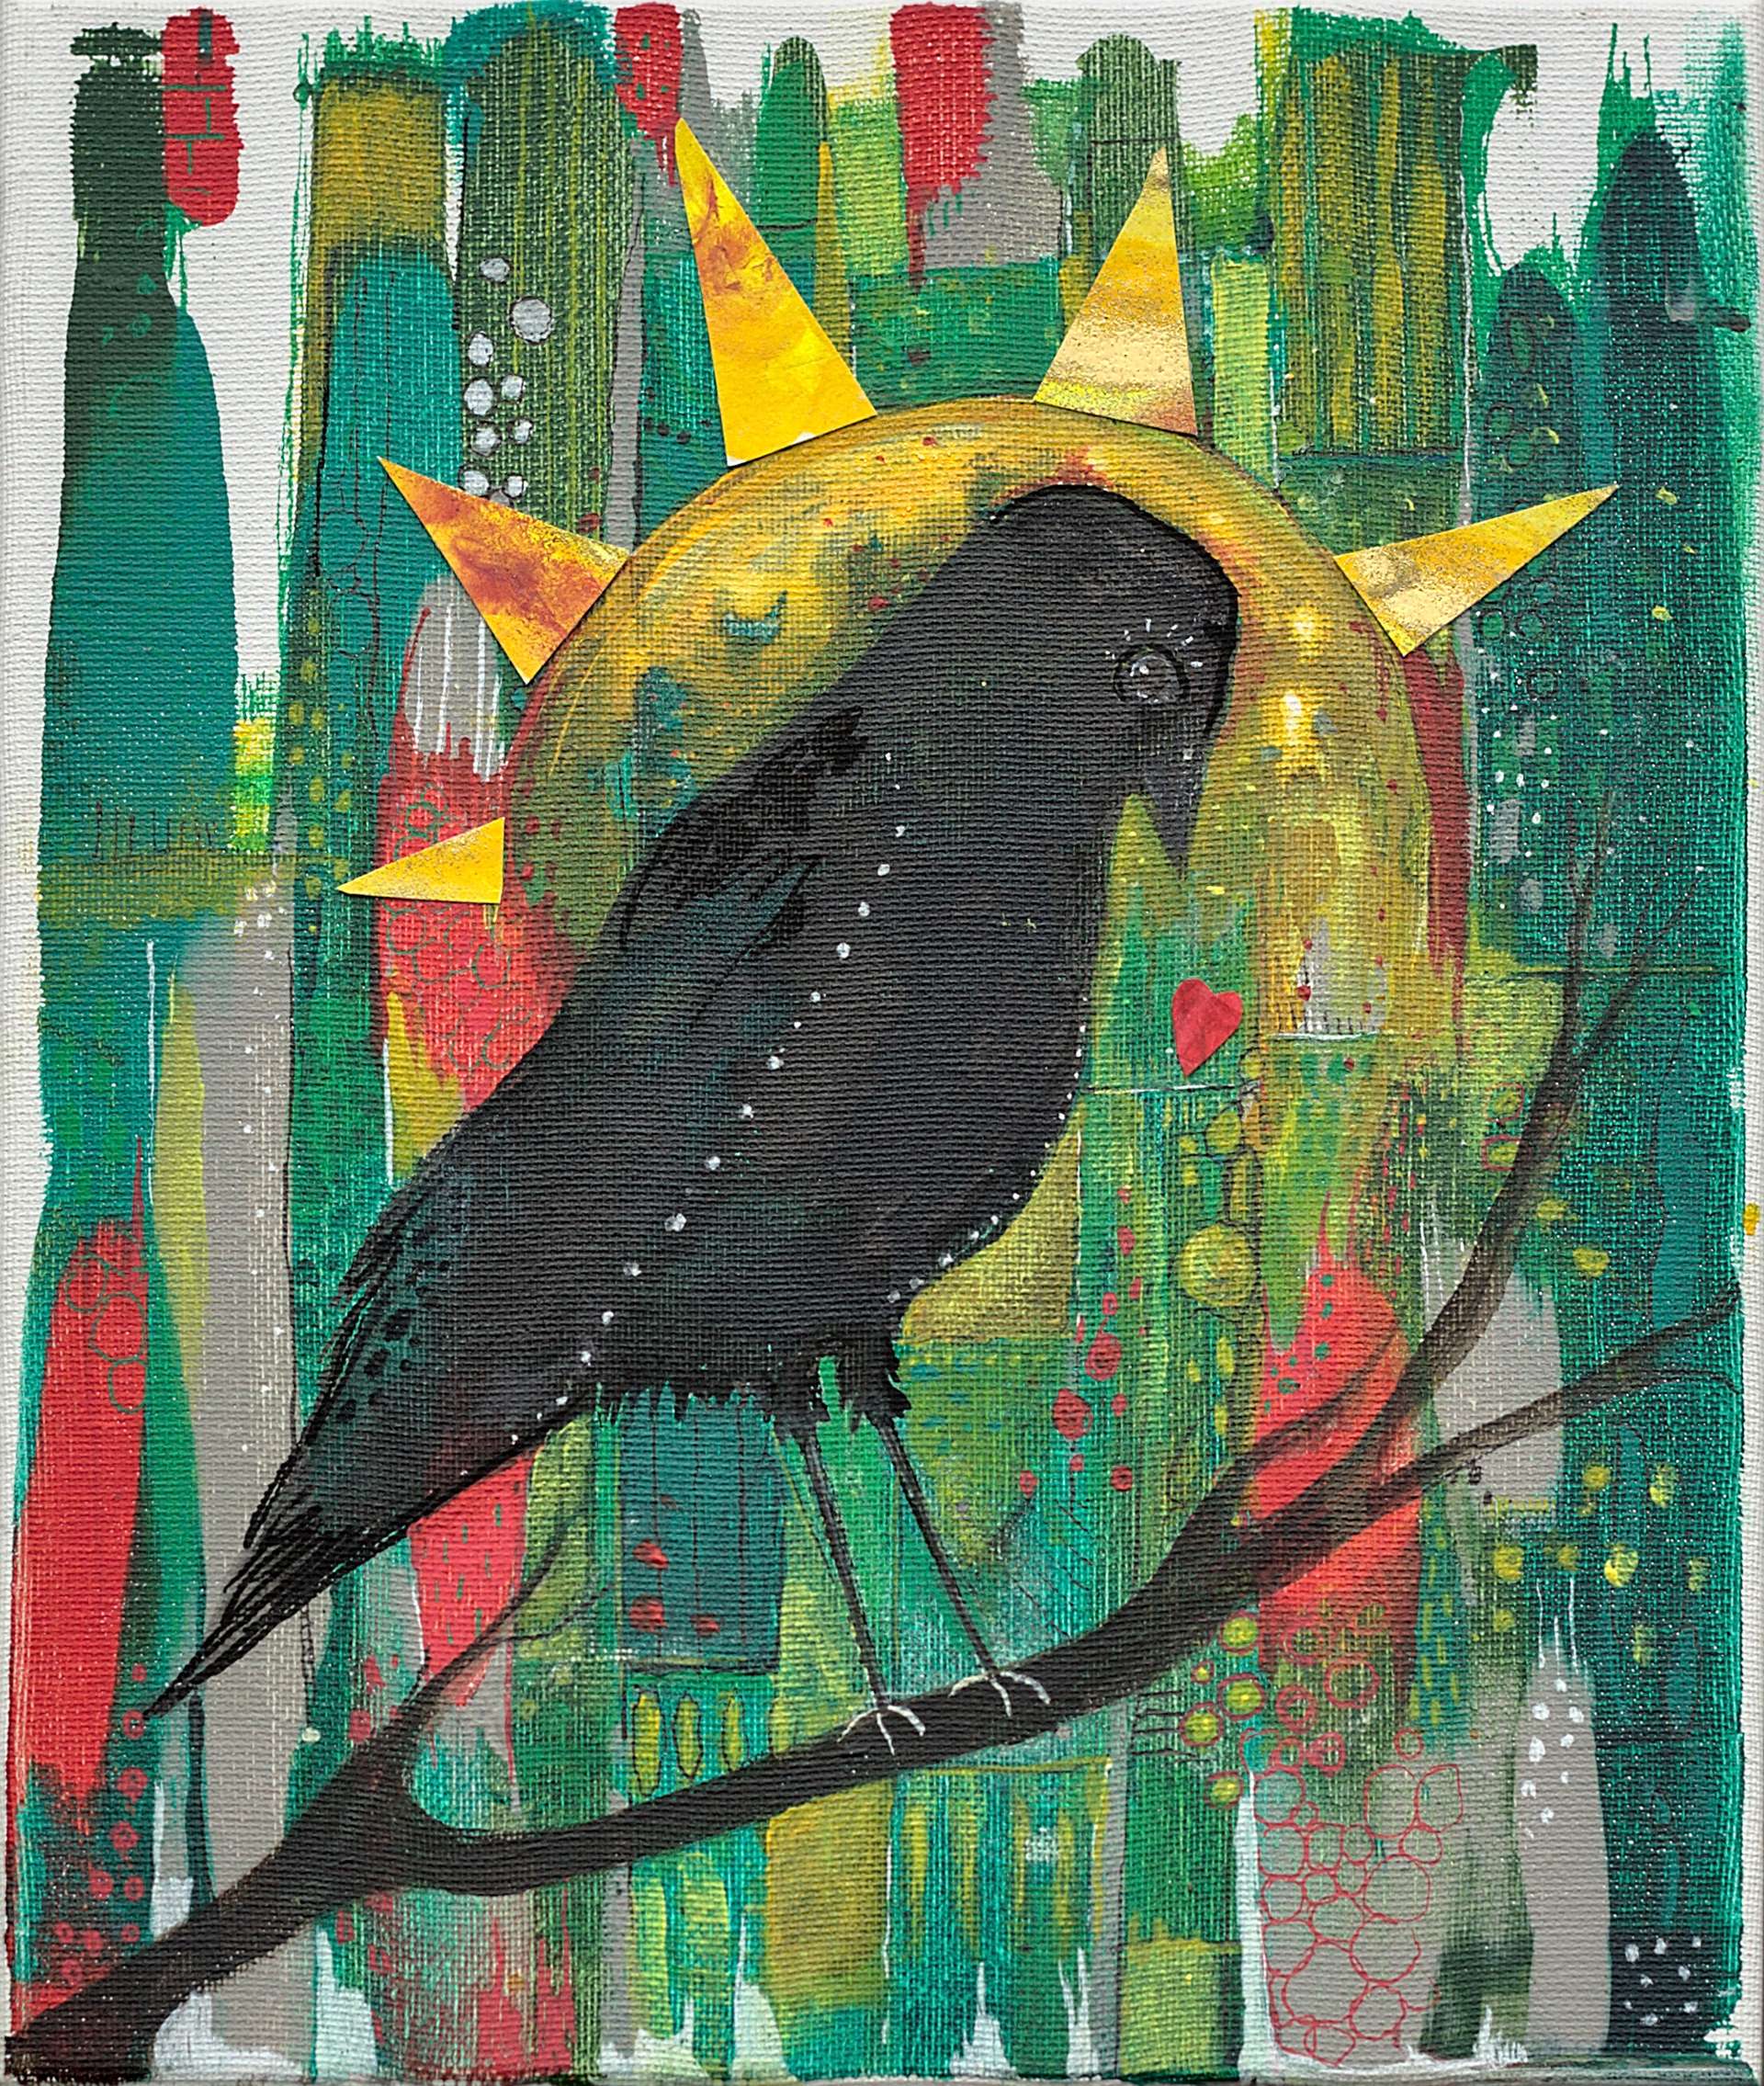 crow art print- whimsical crow bows as she stands on a dark branch against a patchwork field effect of greens, reds and greys. Framing the crow is a golden sun with triangular rays,